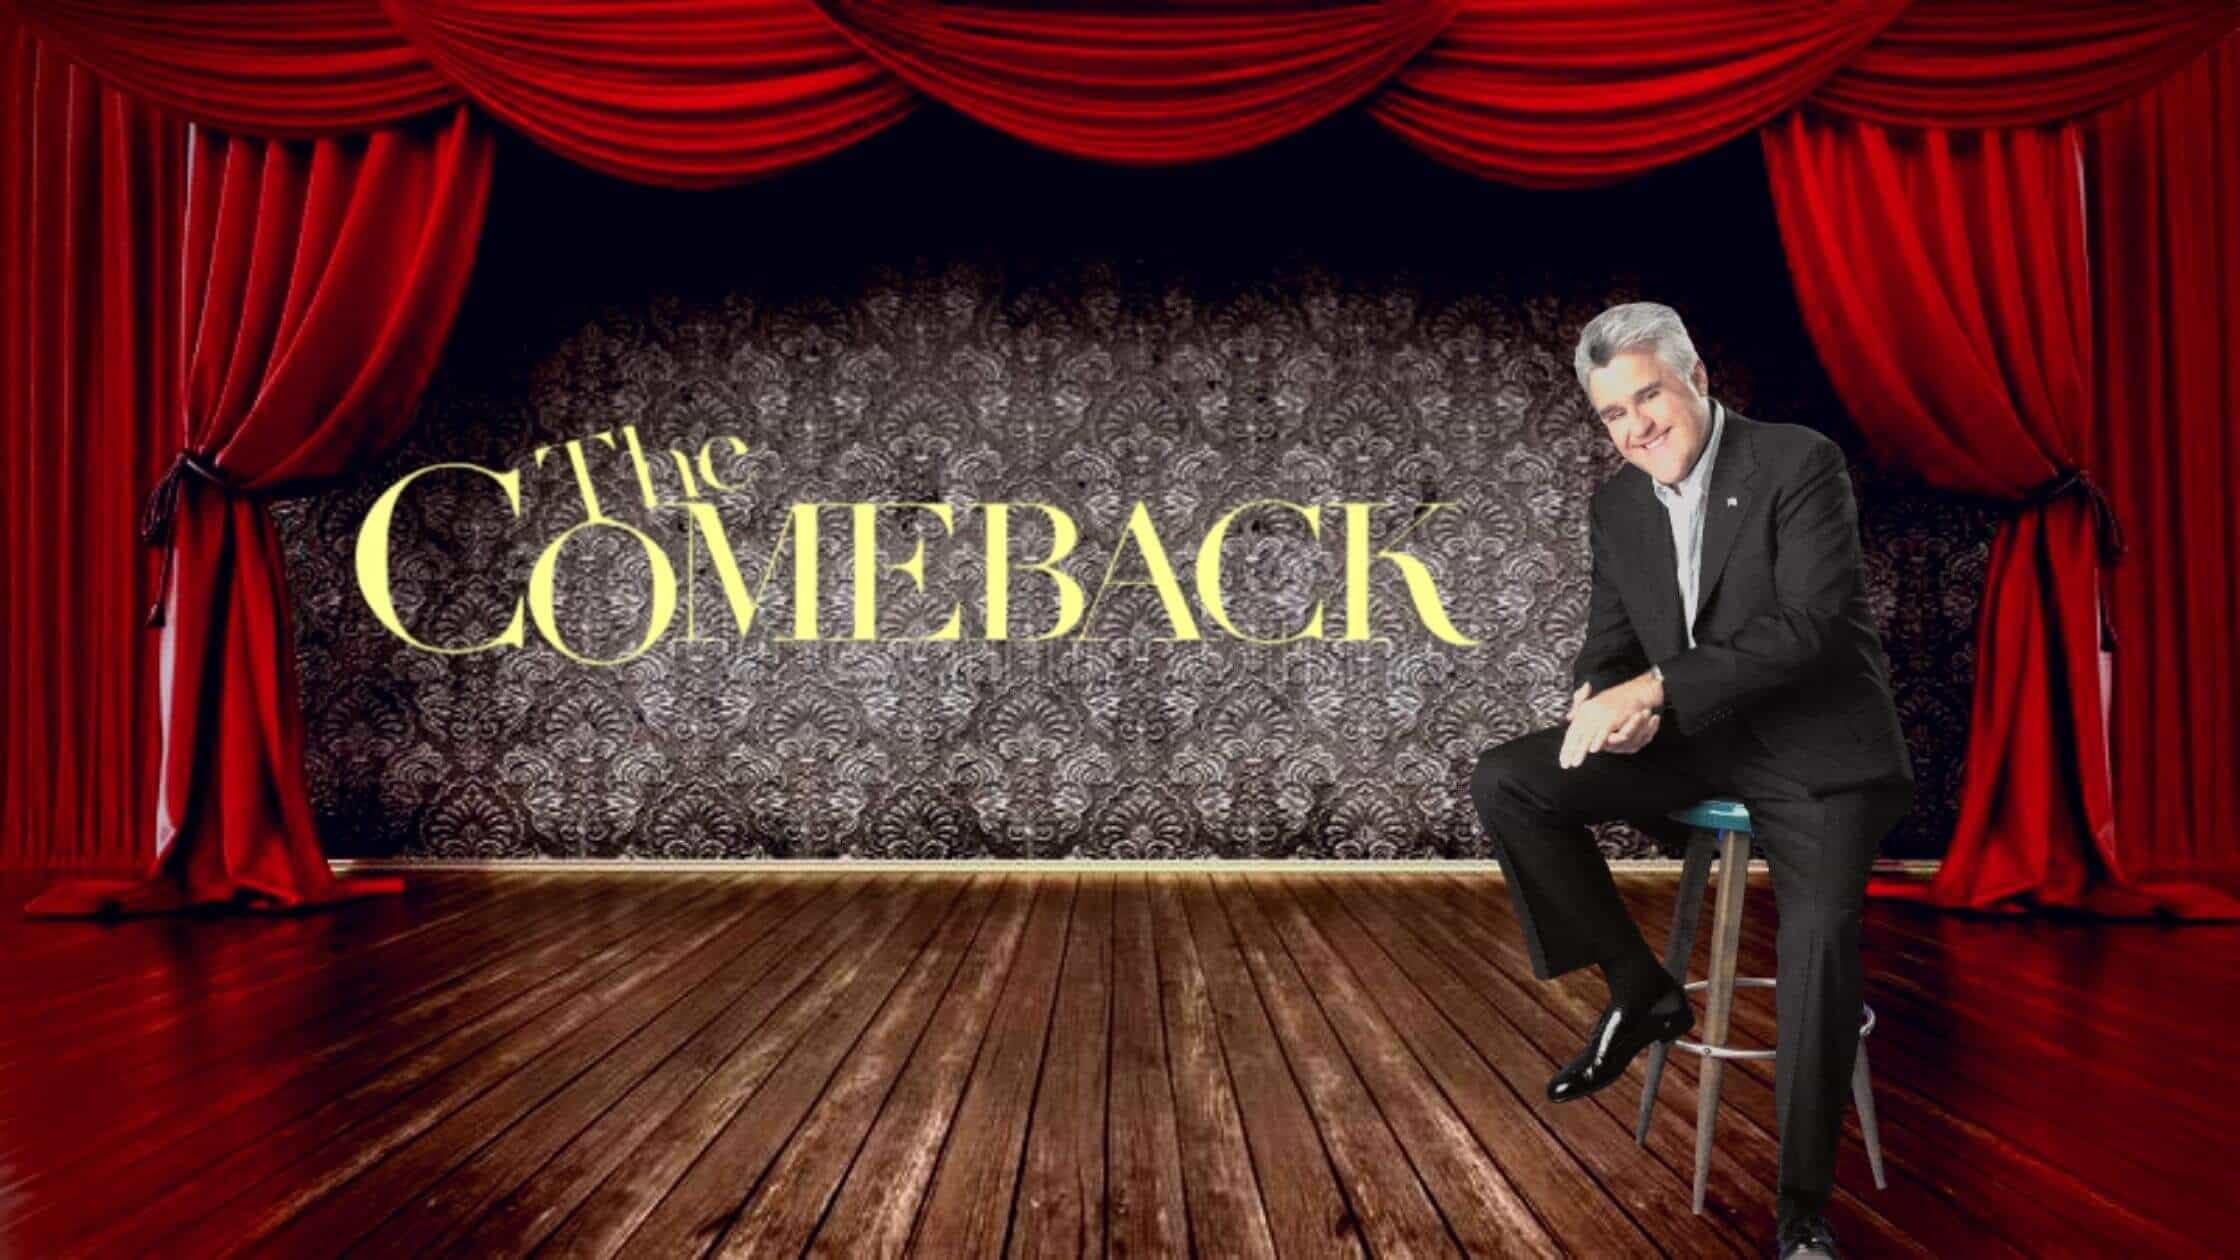 First Performance Since Sustaining "Severe Burns" By Comedian Jay Leno